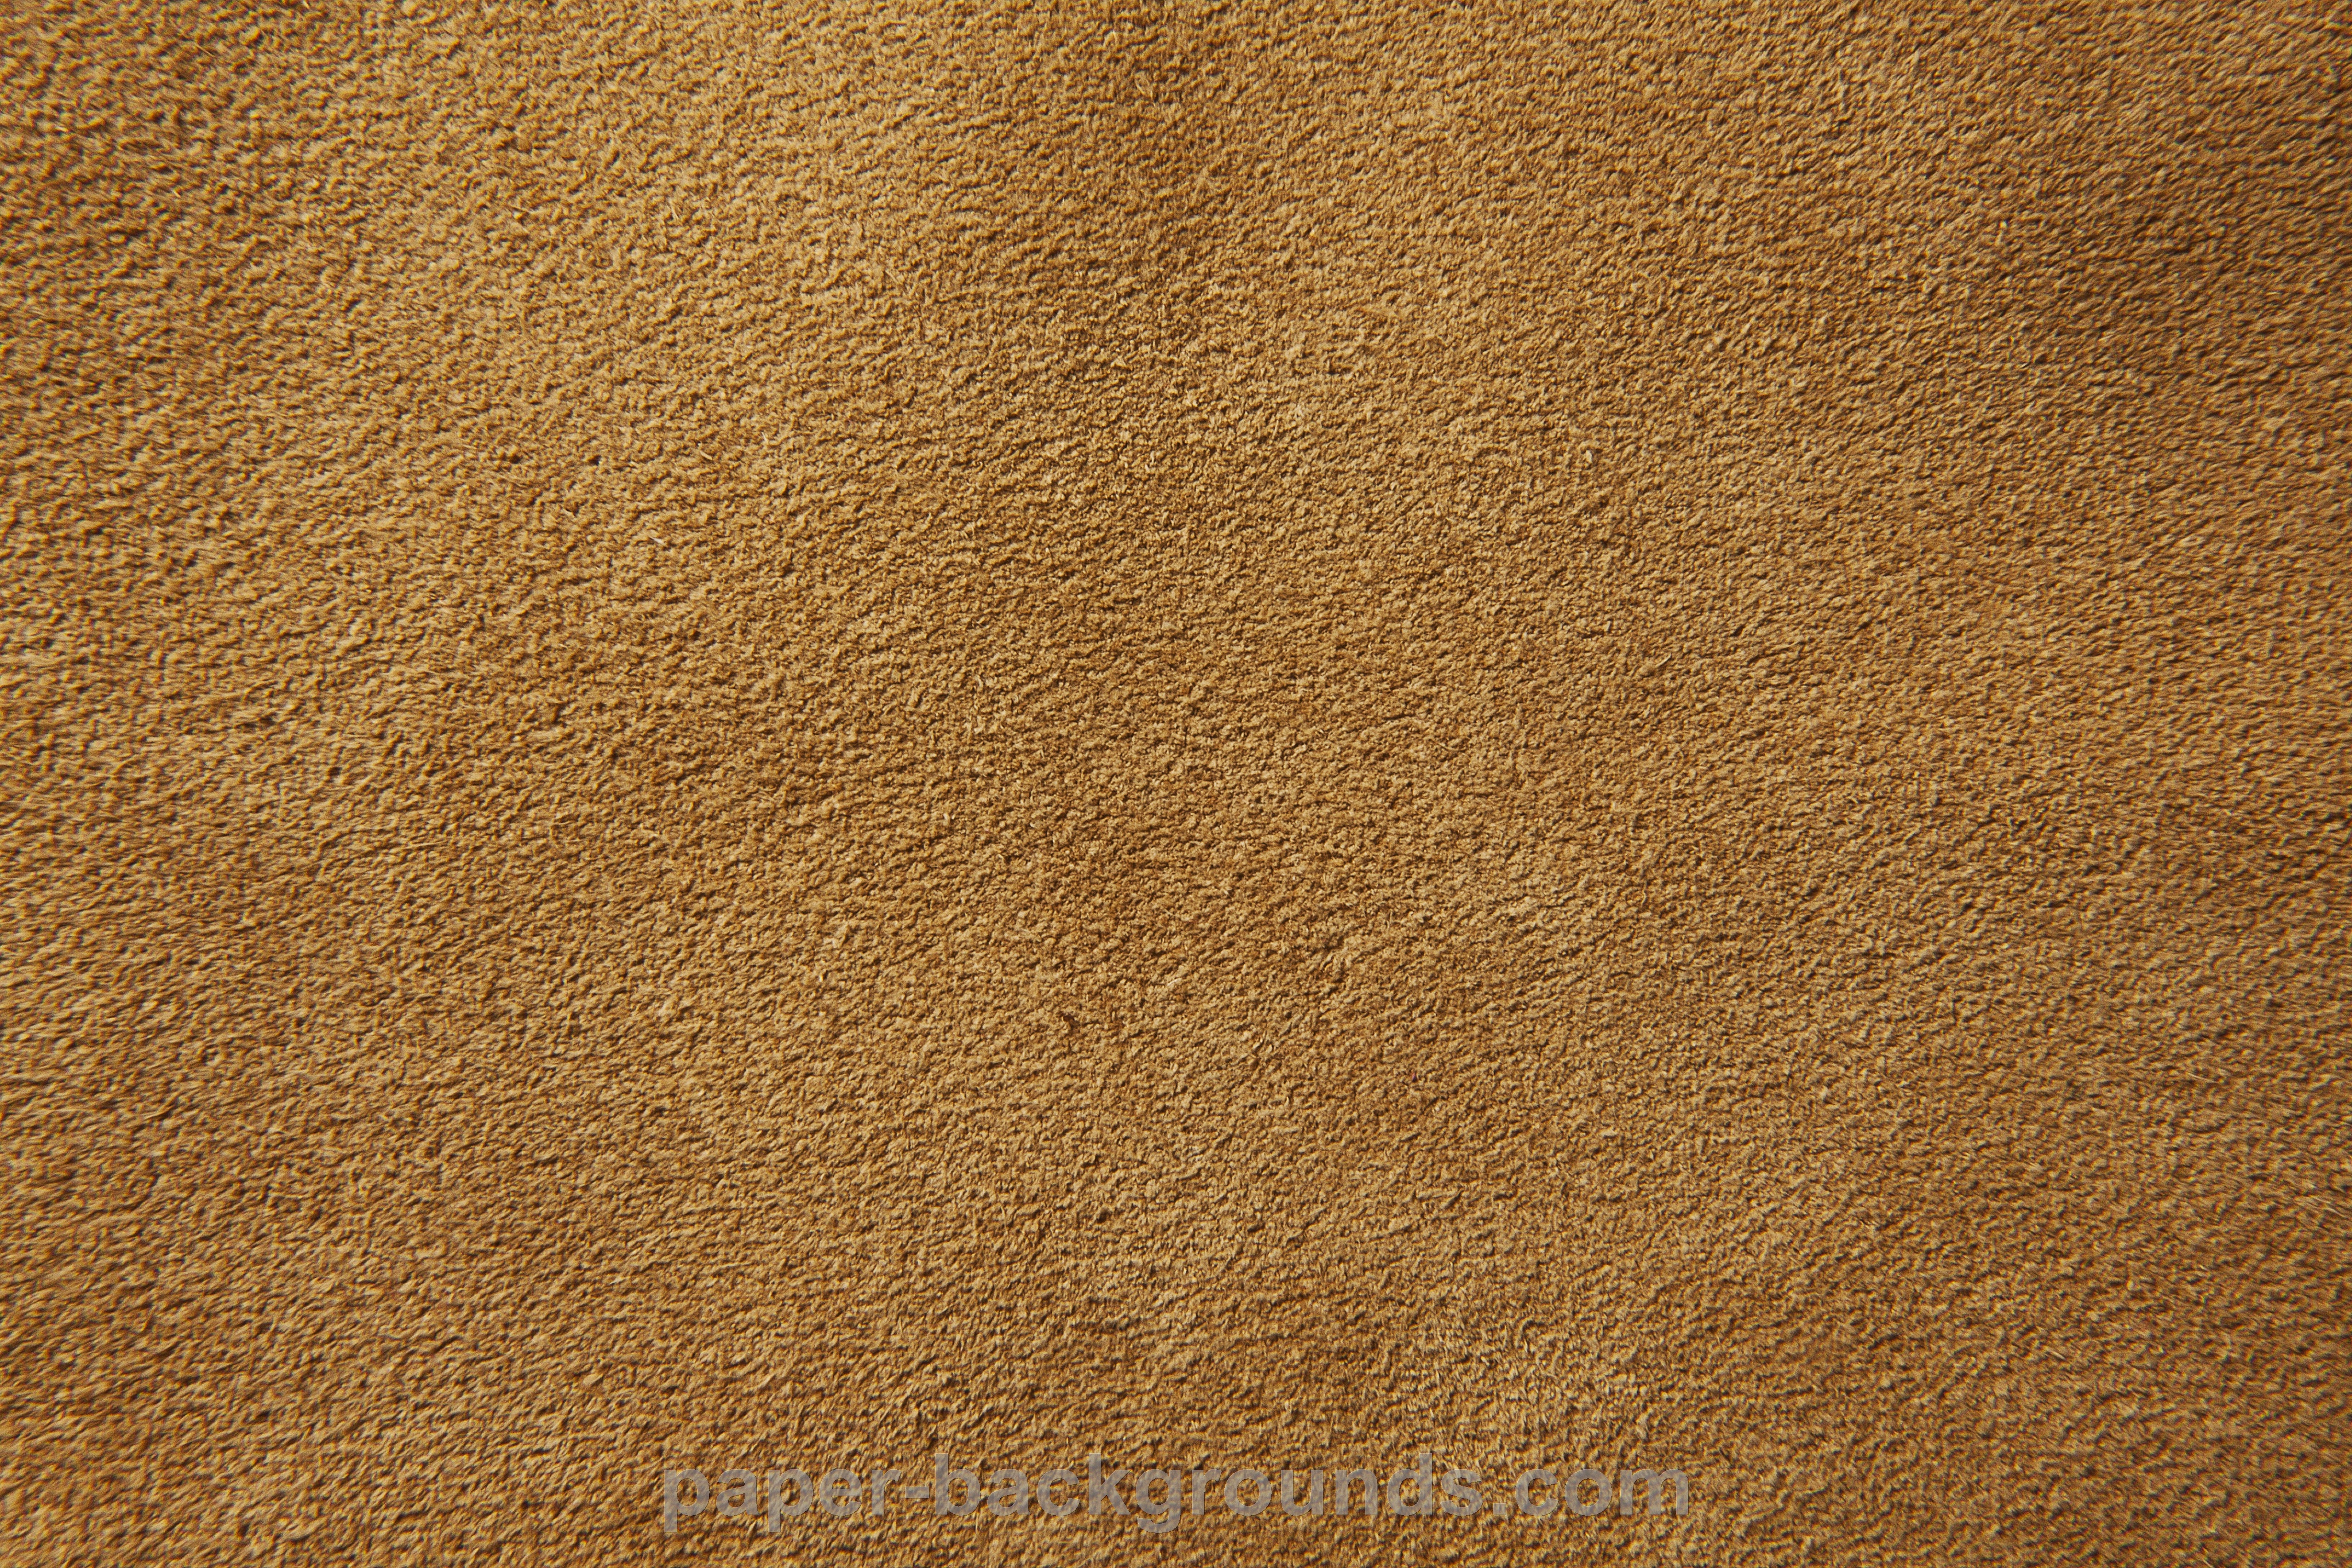 Light Brown Leather Texture Download